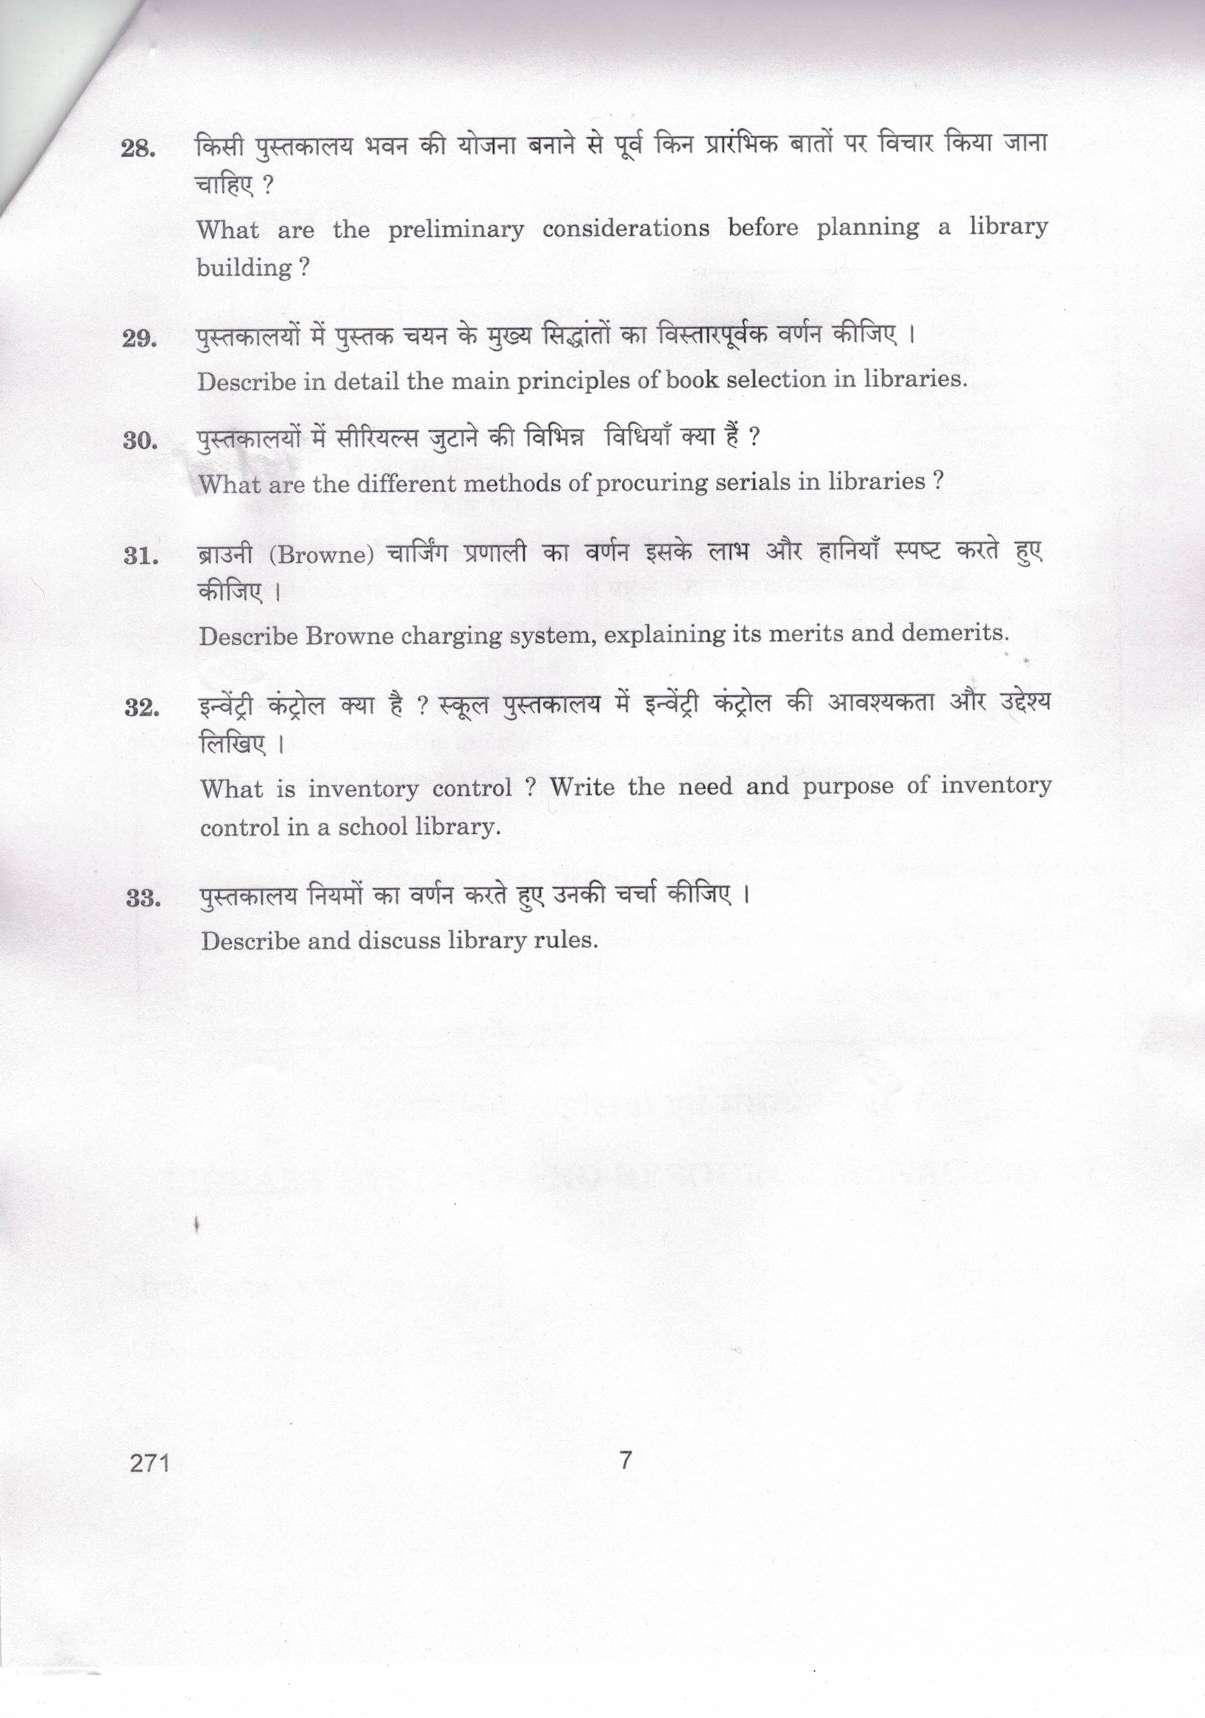 CBSE Class 12 271 Libray Systems And Resource Management_compressed 2019 Question Paper - Page 7